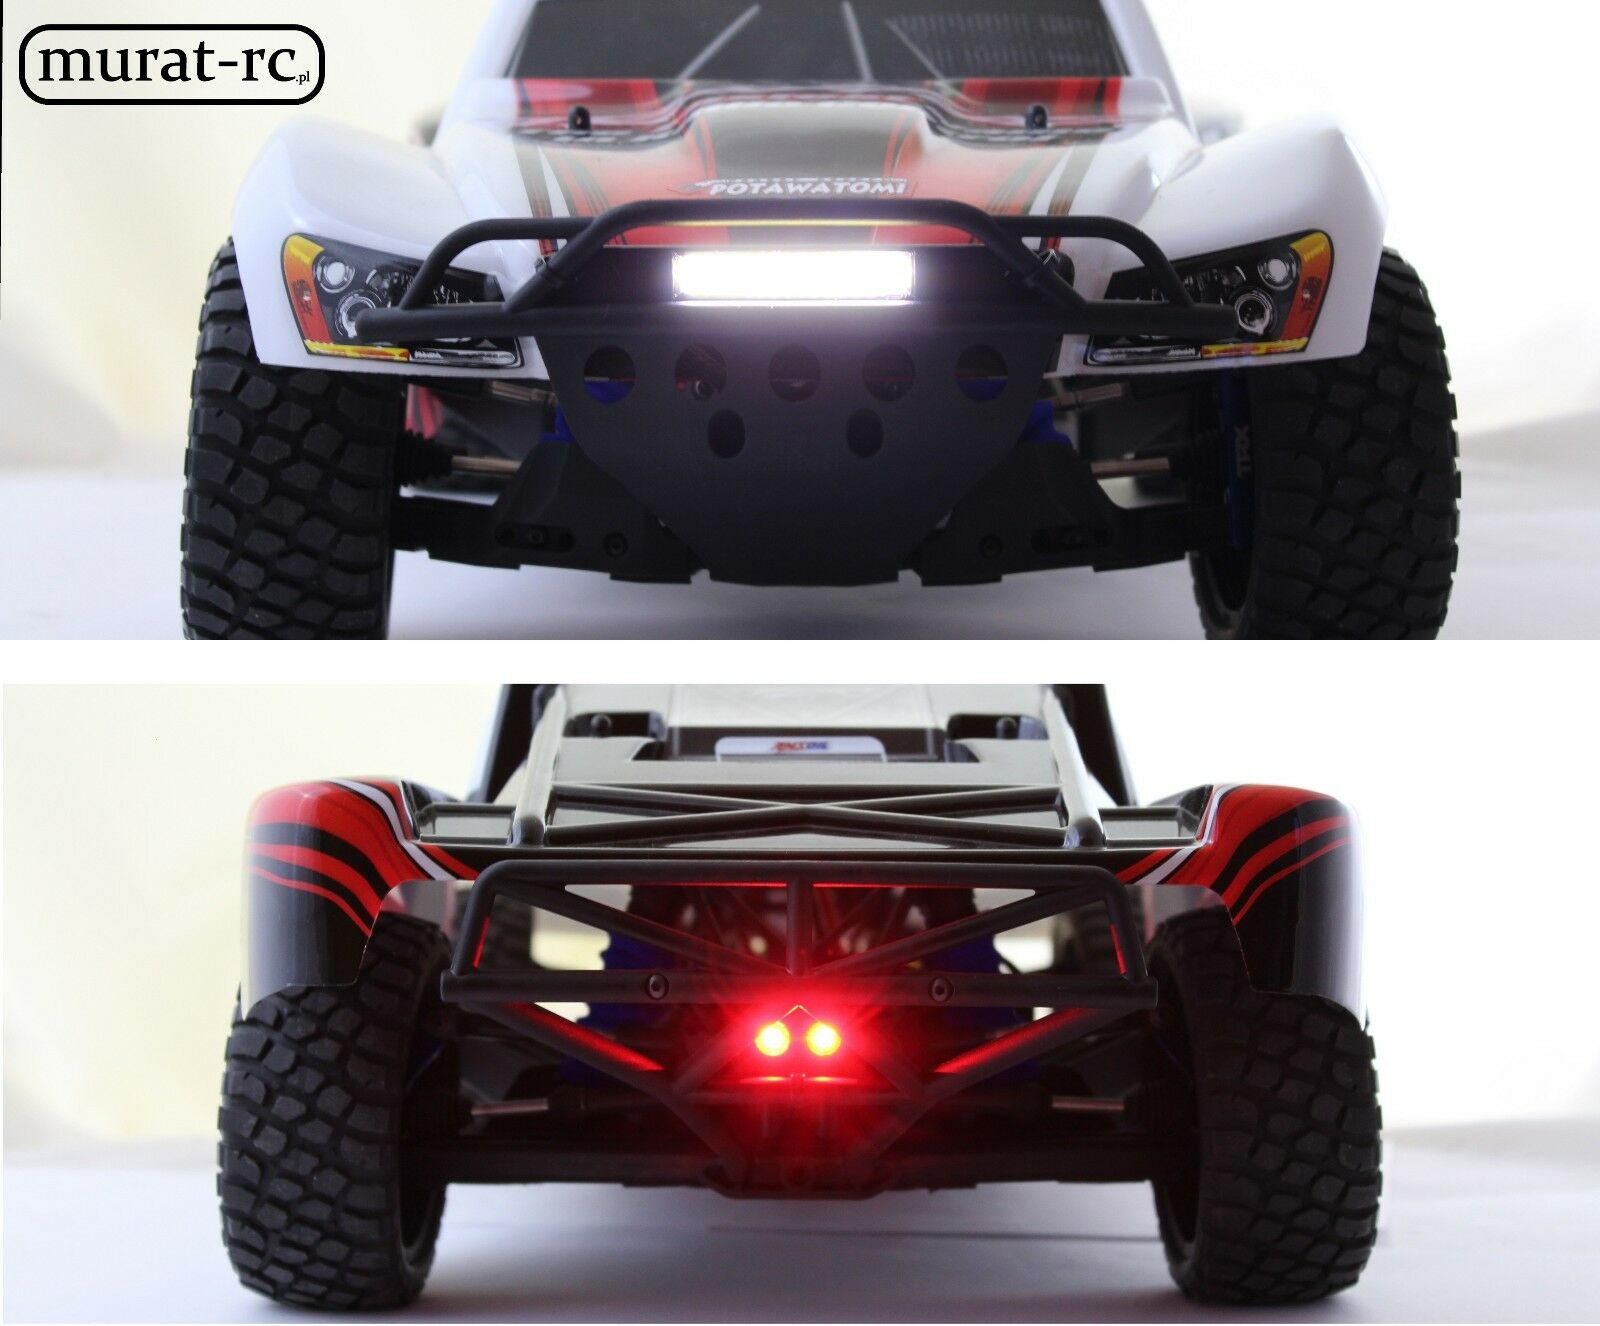 Led Lights Front And Rear Traxxas Slash 4x4 2wd Waterproof By Murat-rc